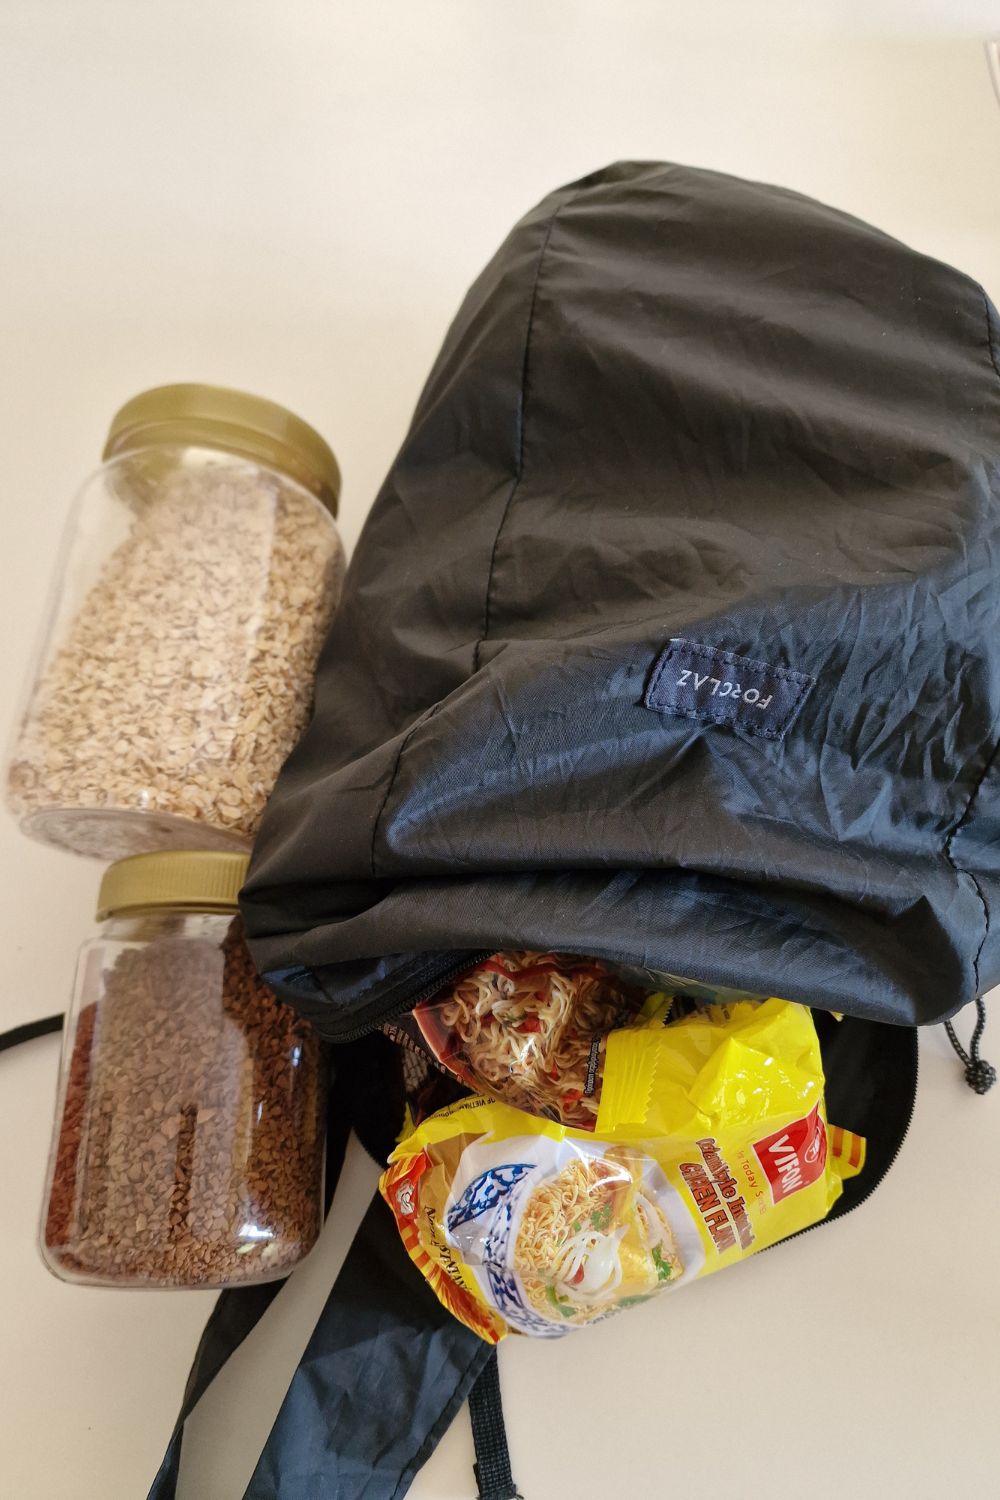 The typical bikepacking food I take on a multi-day cycle trip